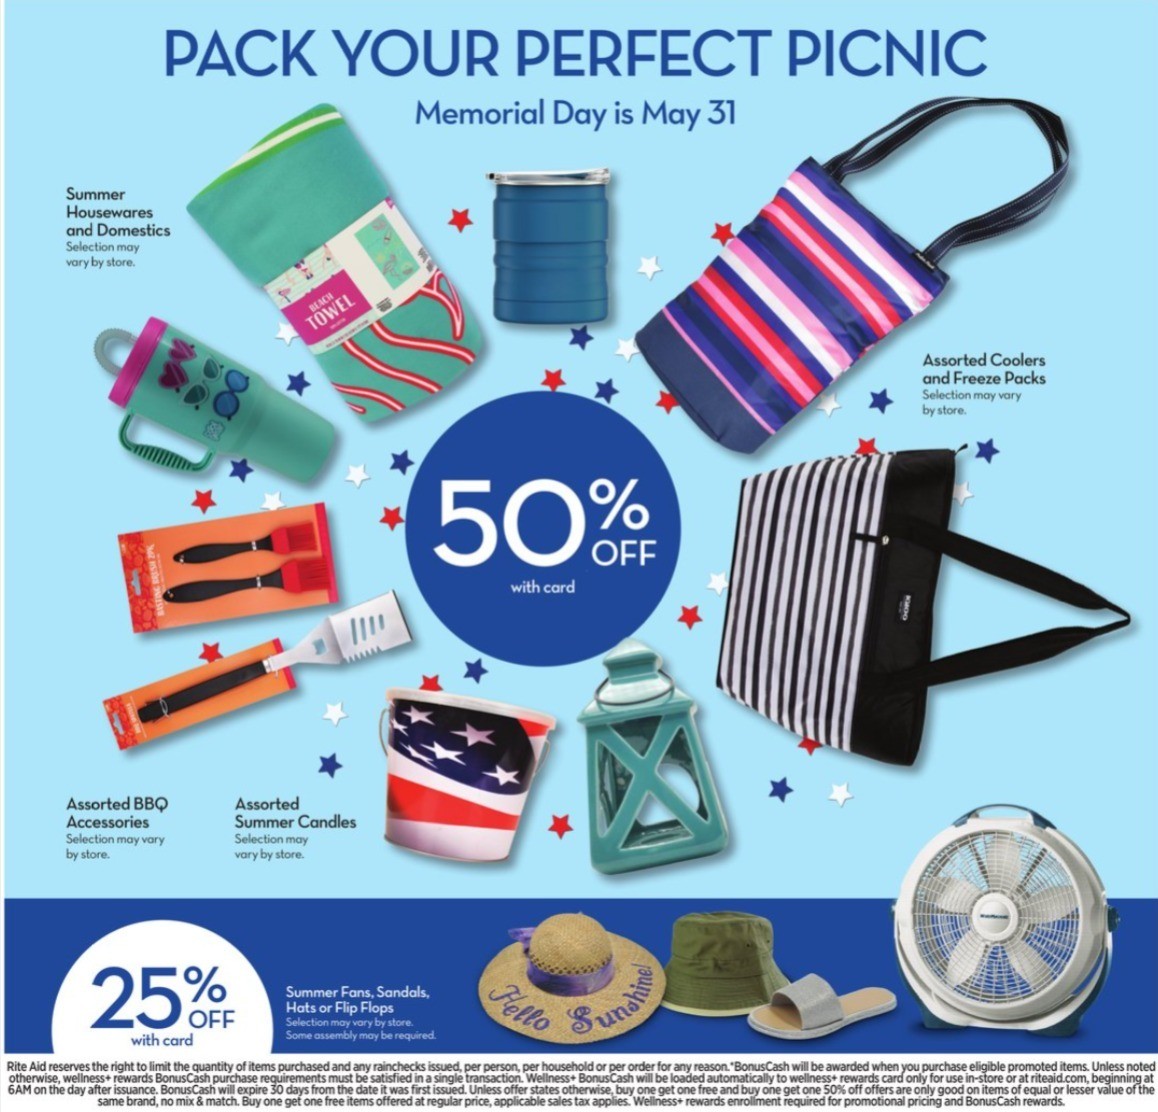 Rite Aid Weekly Ad from May 23